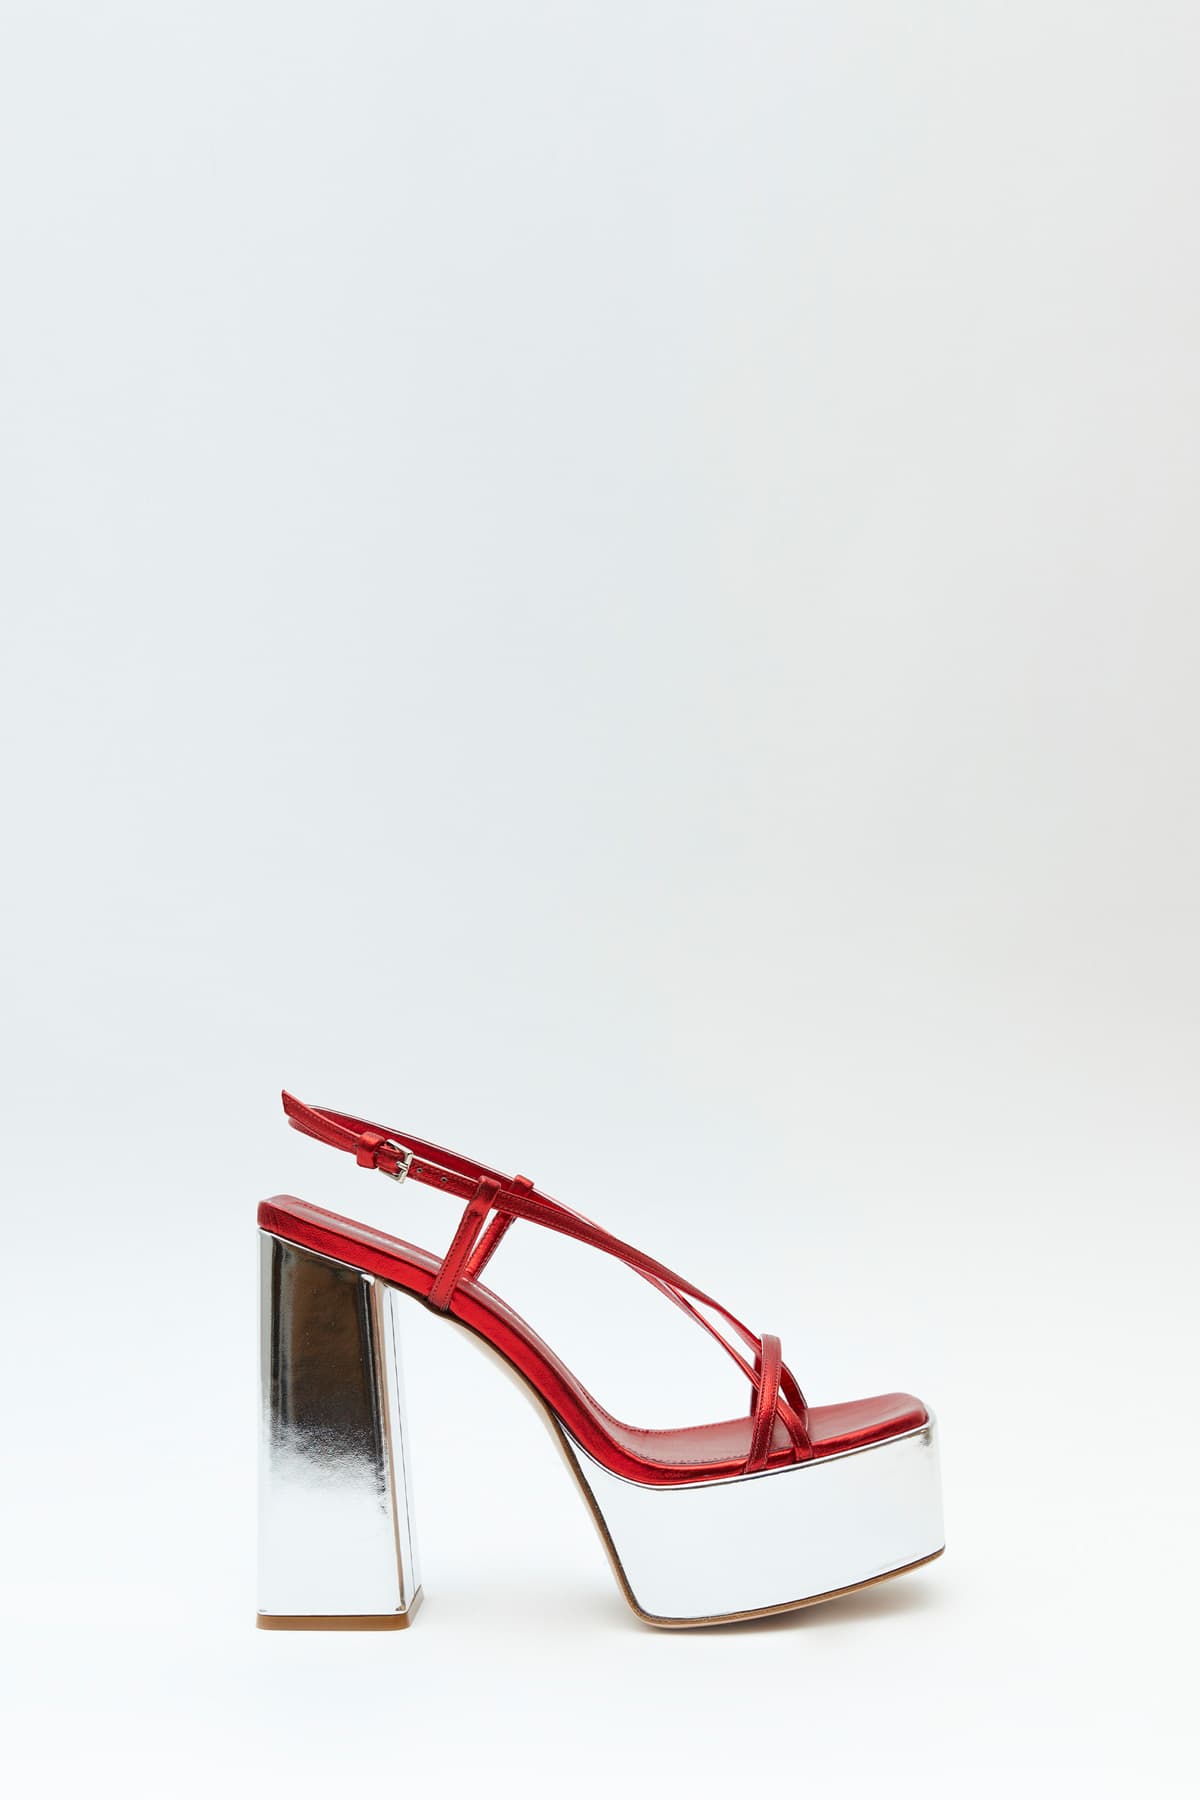 Sideview of The Wannabe sandal in metal red and silver from the Haus of Honey fall-winter 2023-24